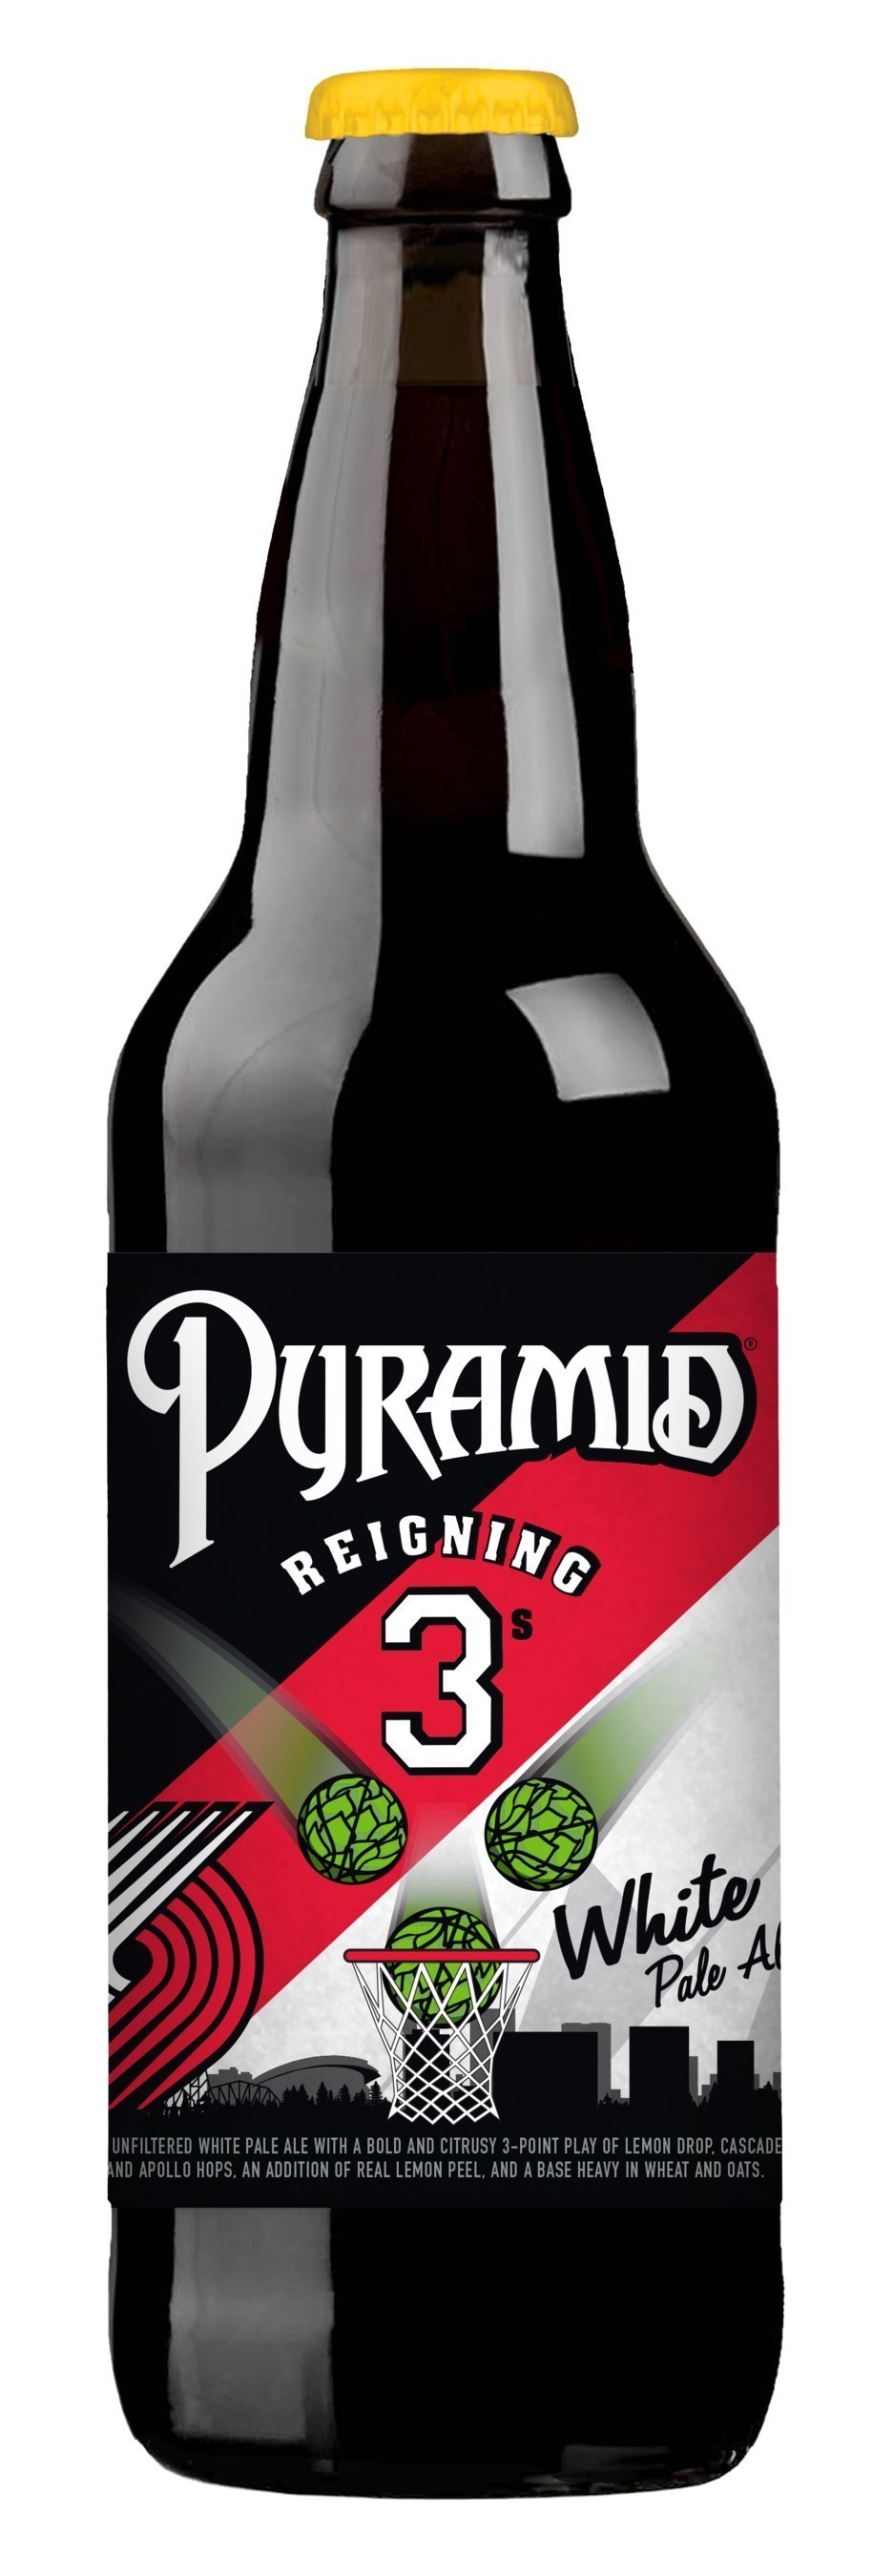 Pyramid Launches Reigning 3s: New Limited-Edition Beer With Portland Trail Blazers